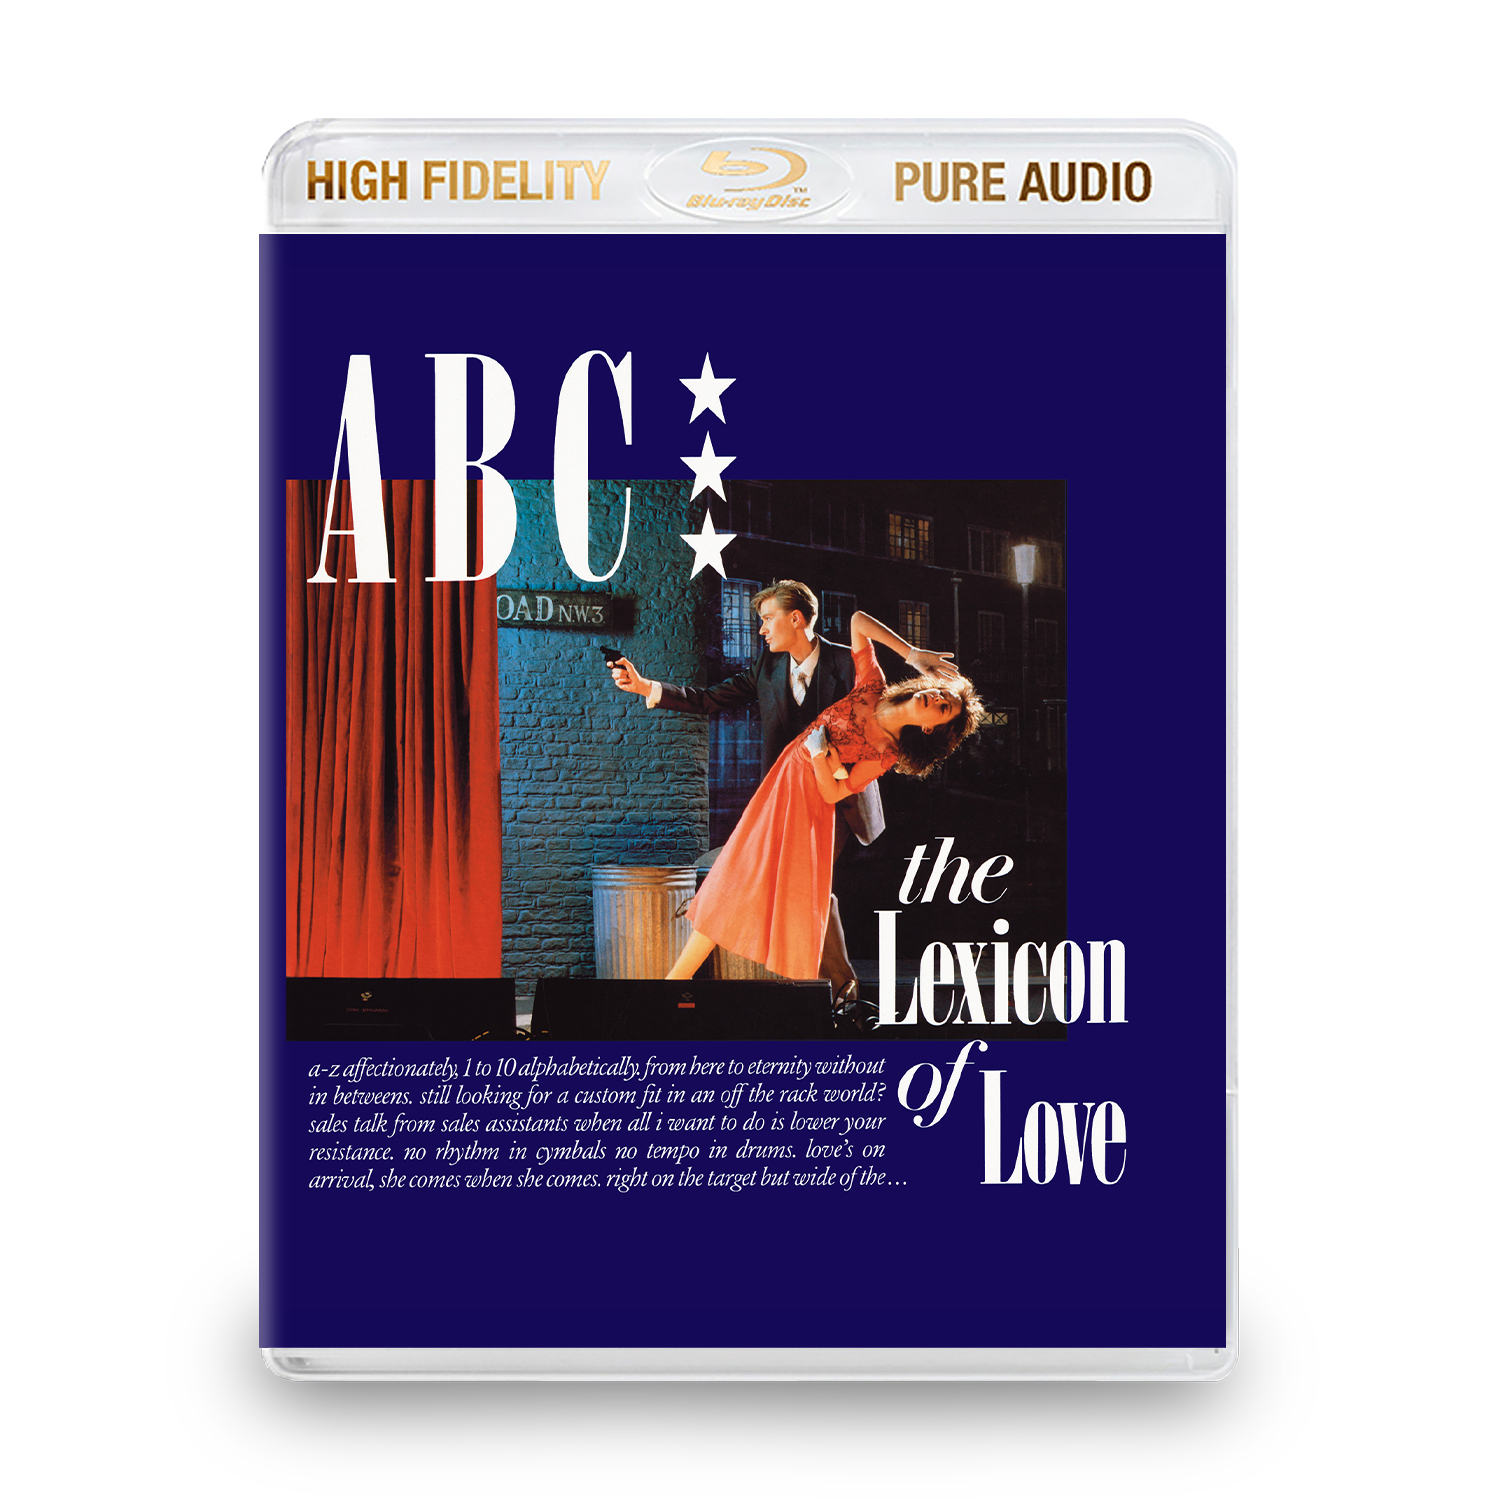 ABC's The Lexicon of Love on SDE-exclusive blu-ray audio 